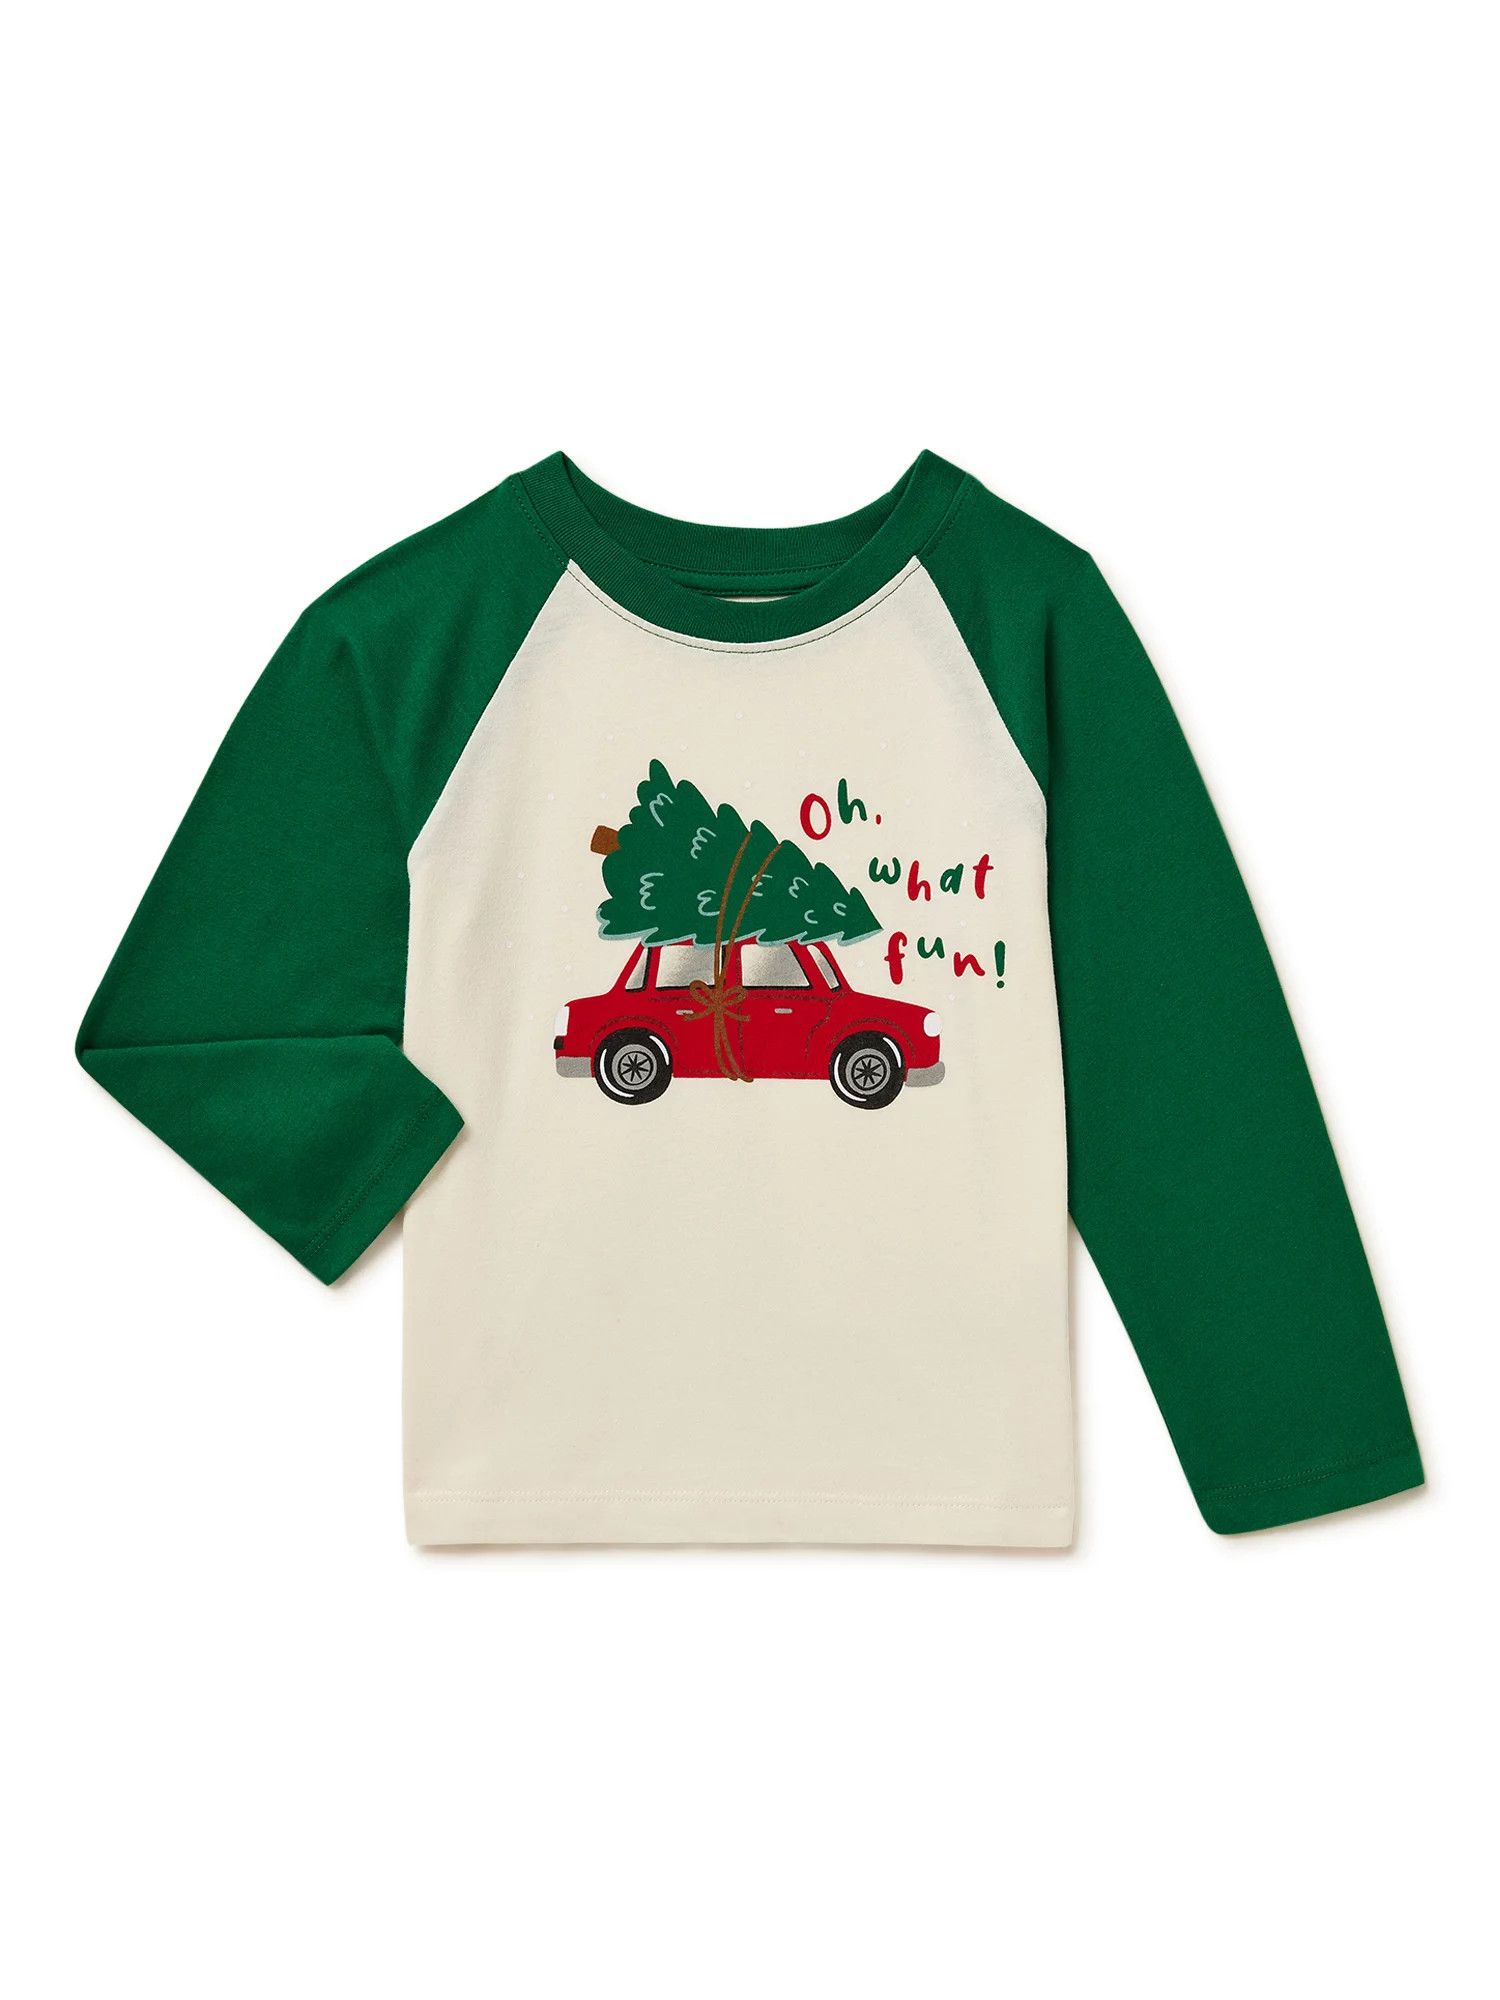 Holiday Time Baby and Toddler Unisex Long Sleeve Raglan Christmas Tee, Sizes Sizes 12 Months-5T | Walmart (US)